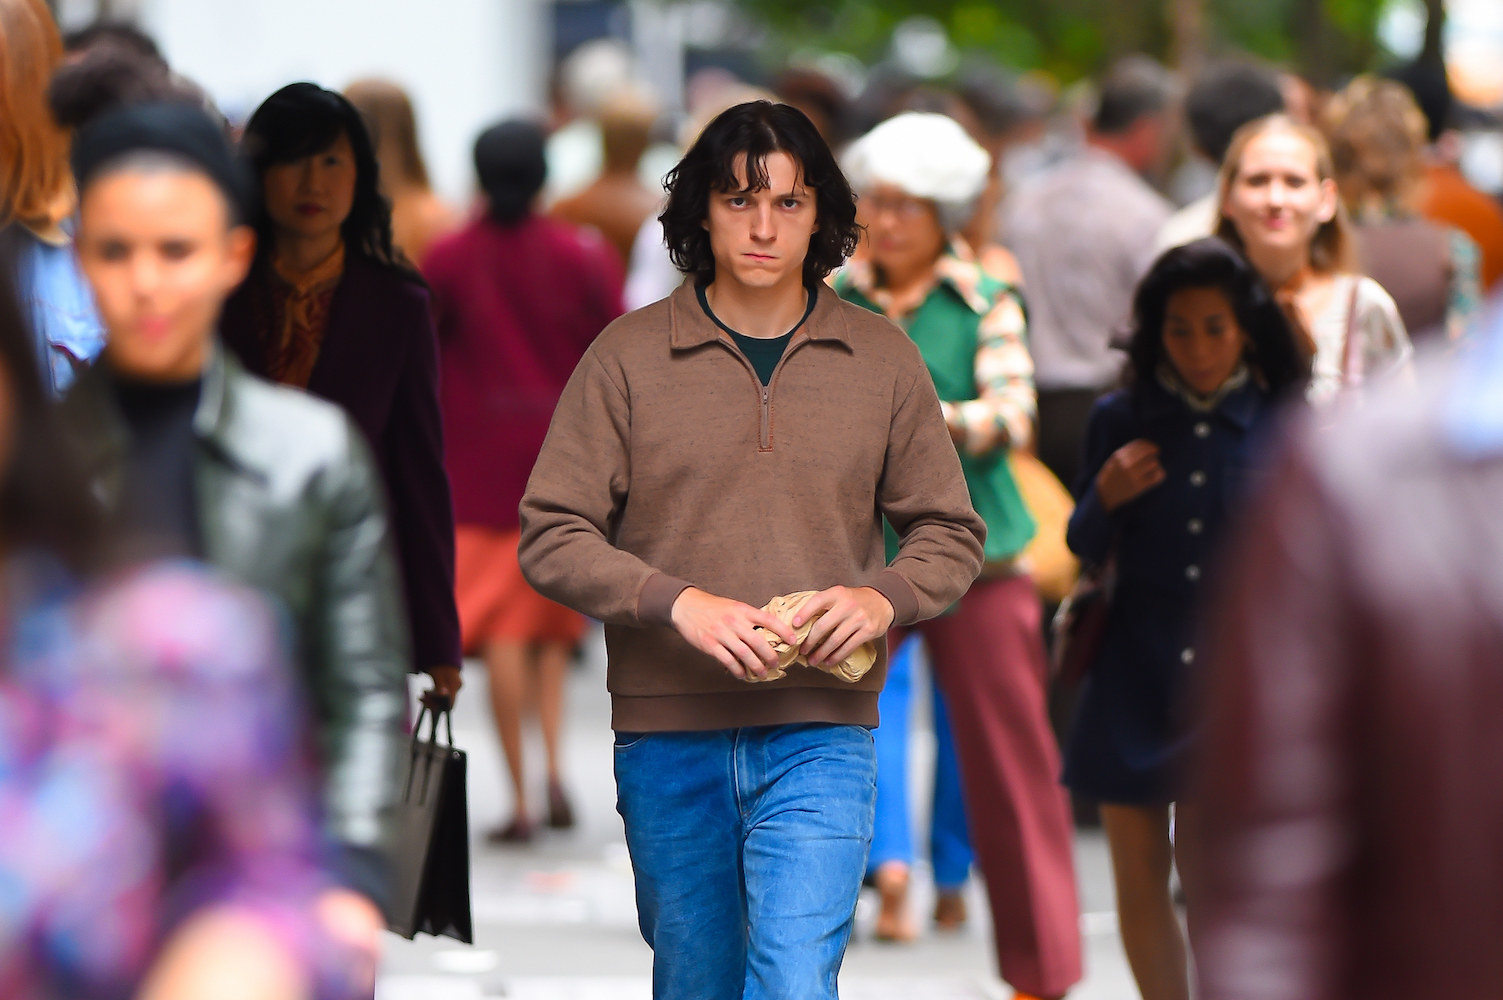 man walking down the street in a crowd of people